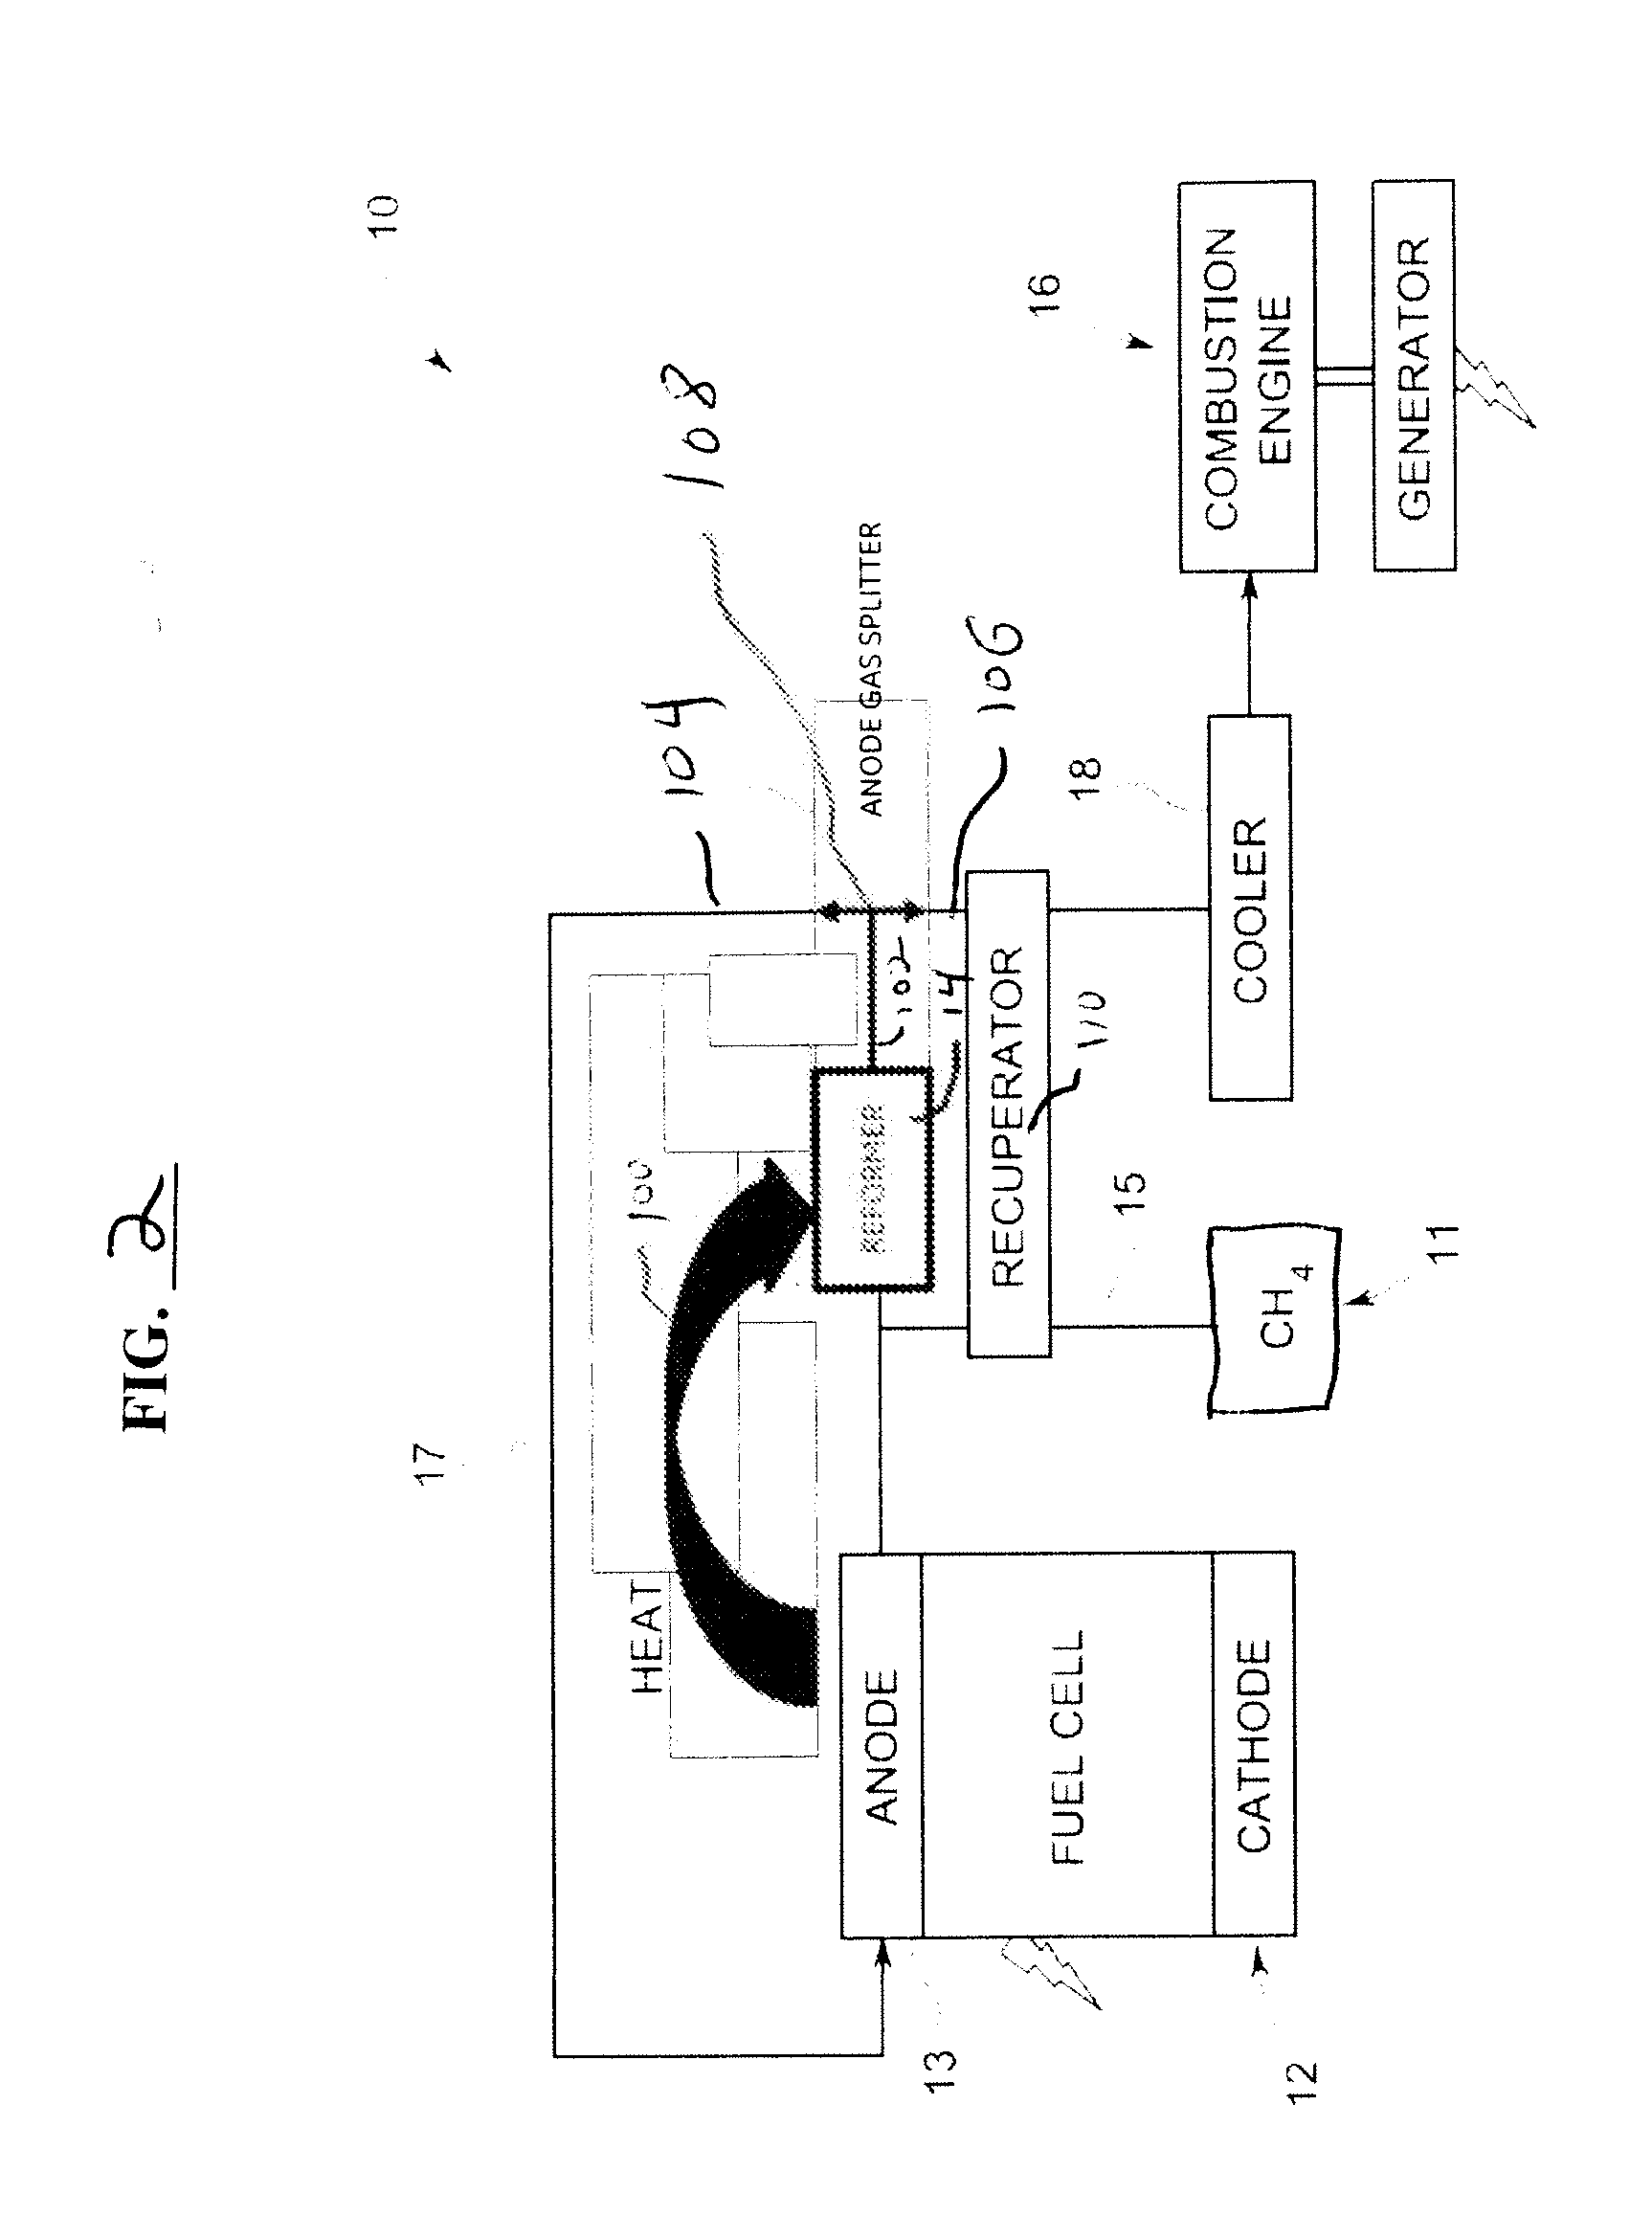 Power generation system utilizing a fuel cell integrated with a combustion engine